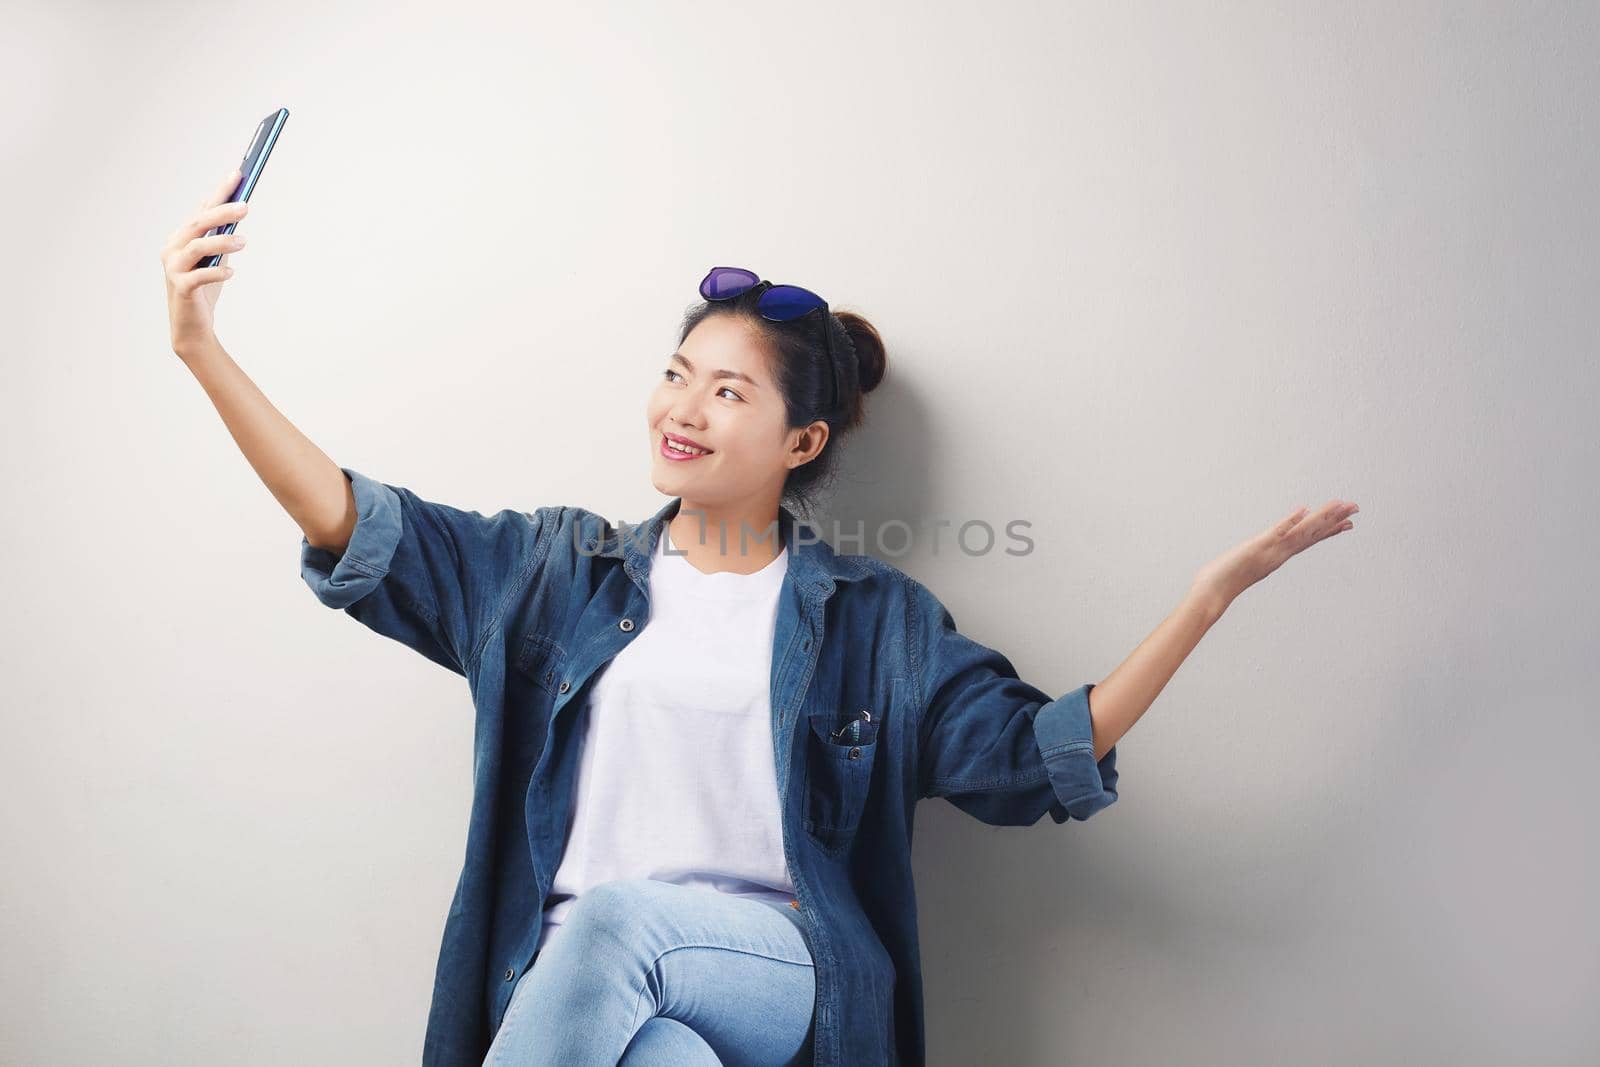 Smiling young Asian woman making video call on smartphone over gray background